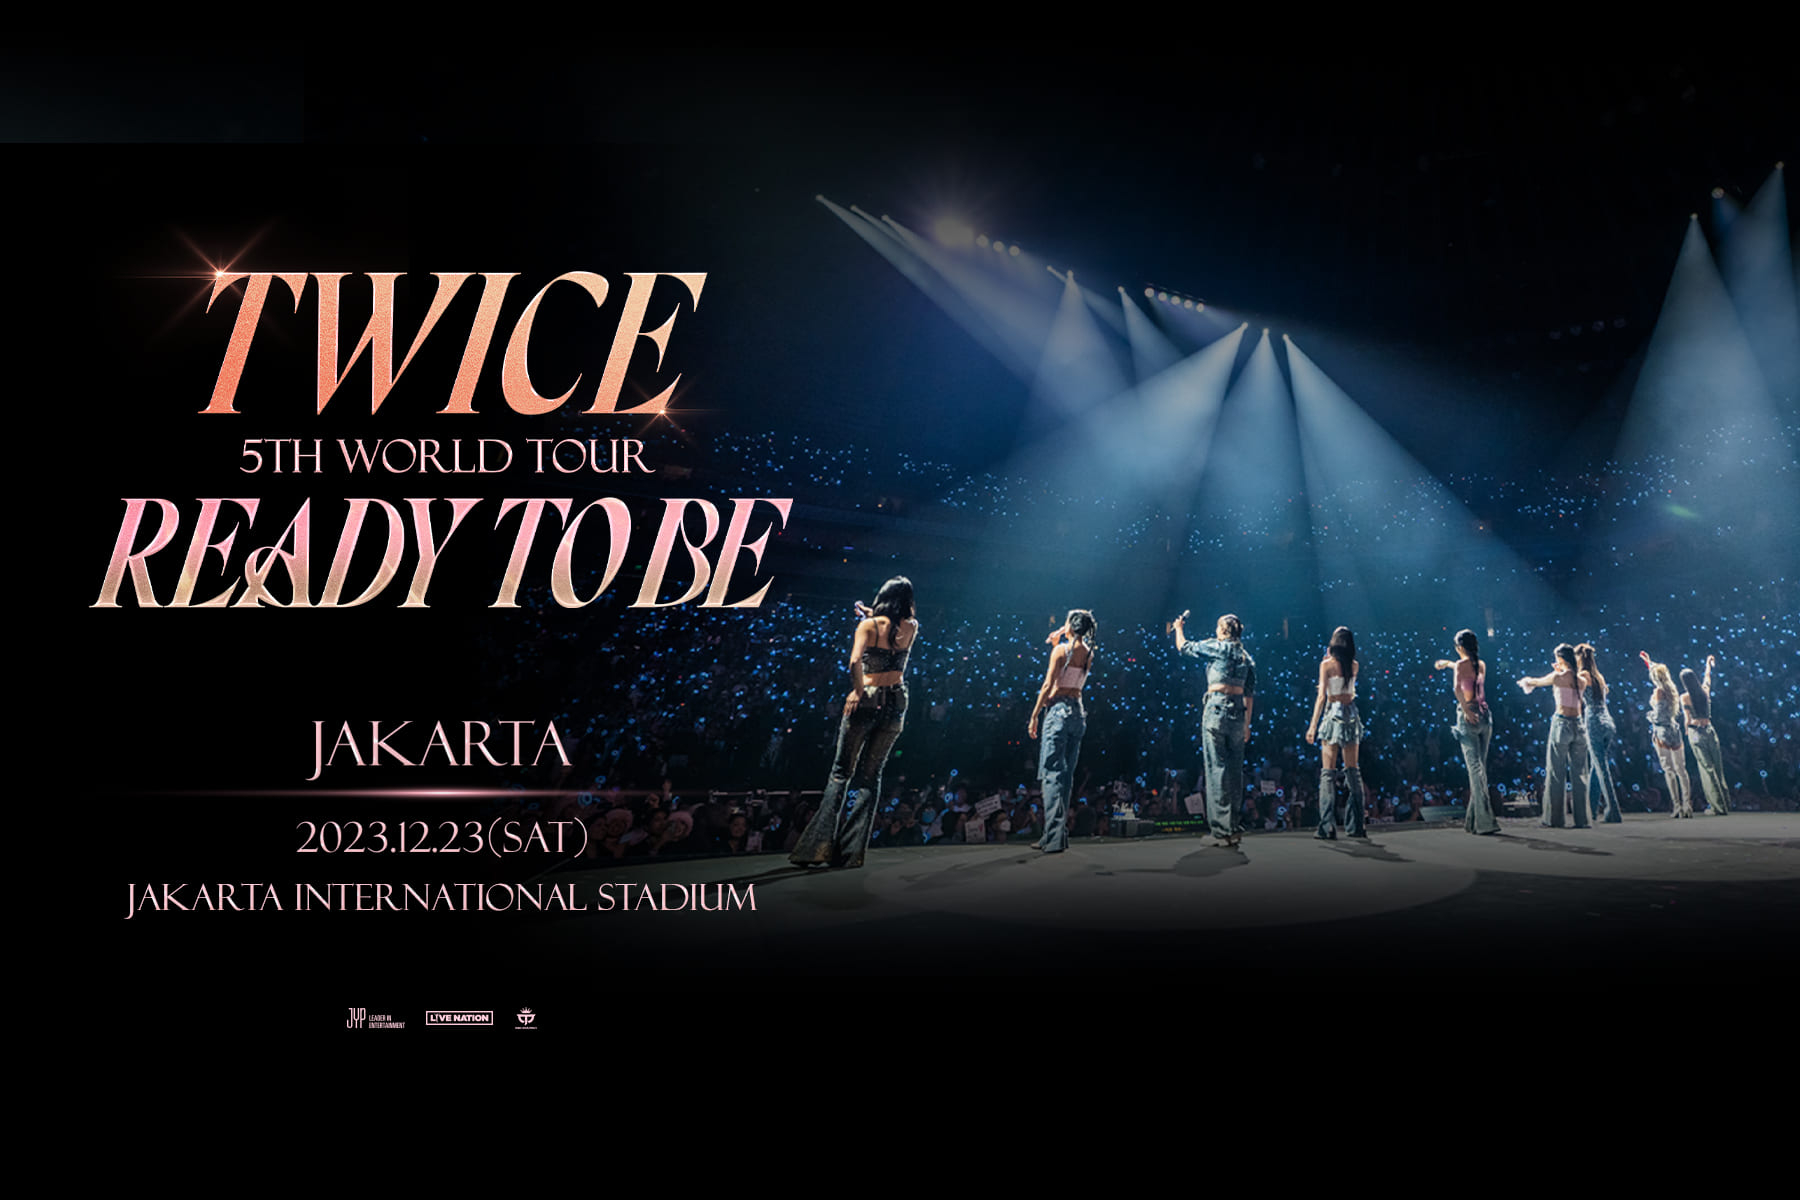 Buy TWICE 5TH WORLD TOUR 'READY TO BE' IN JAKARTA Ticket Promo